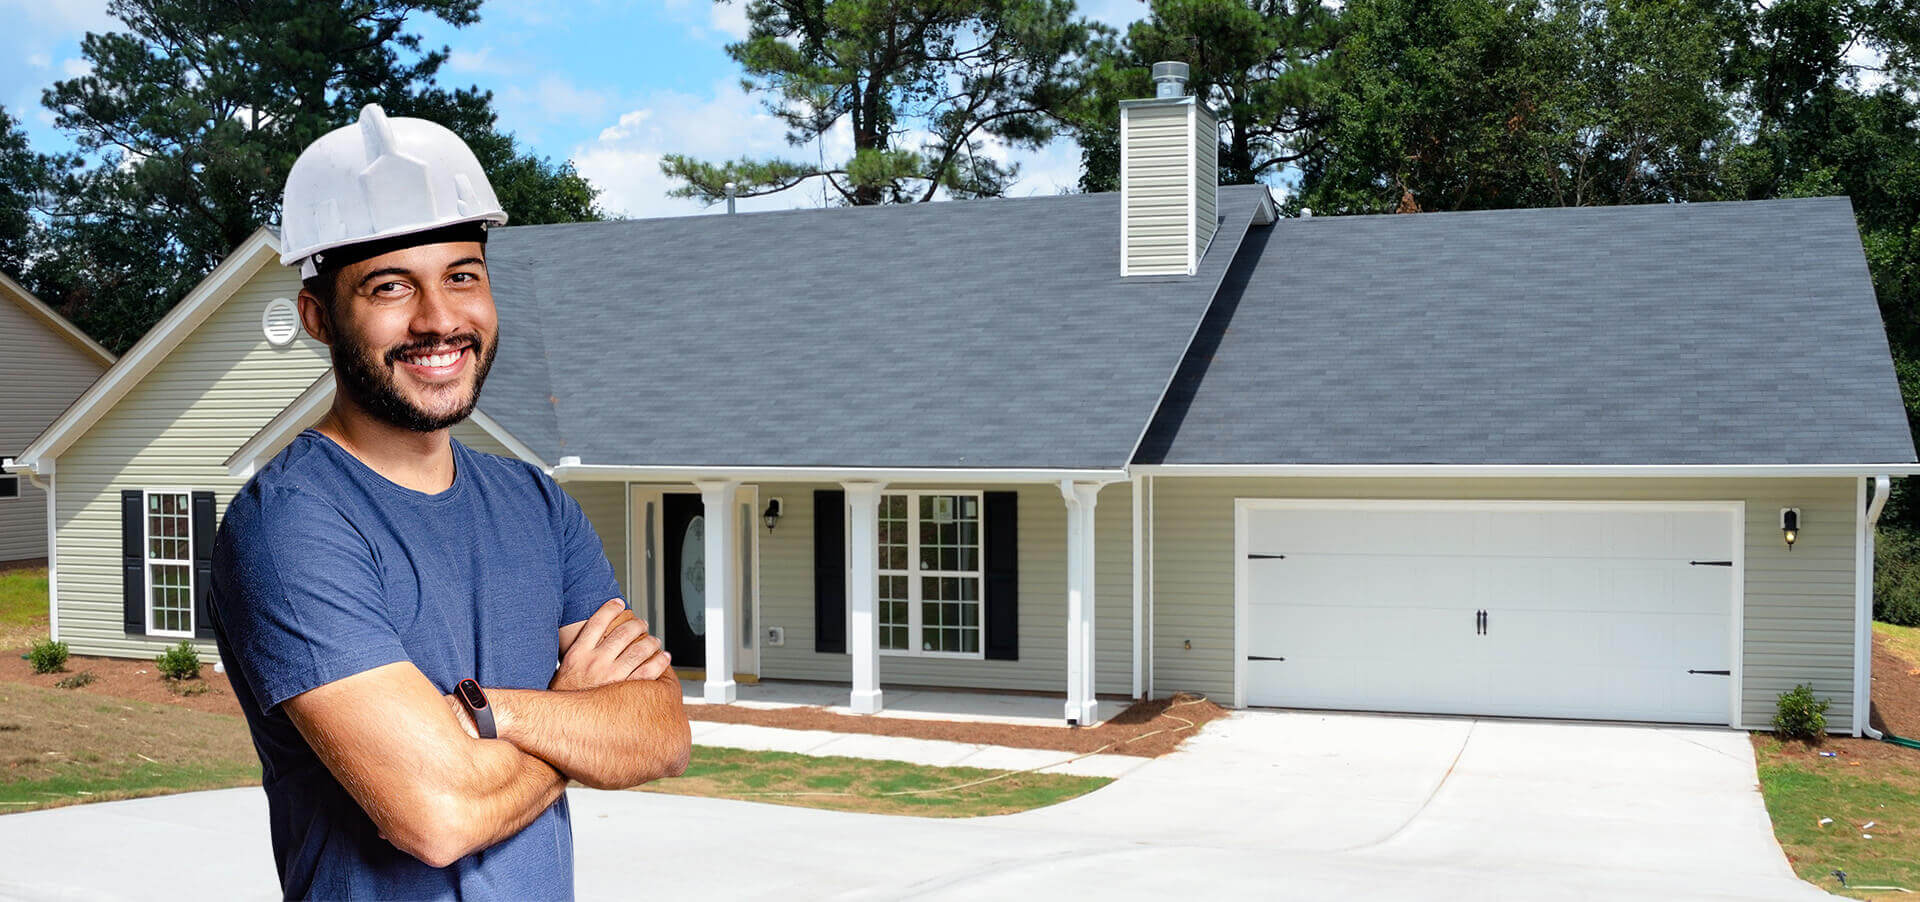 A Construction Worker Man Smiling Next To A House With A New Roof - Residential Solar Roofing Nashville - Music City Solar Solutions 2306 Eugenia Ave Suite A Nashville TN 37211 (615) 692-1602